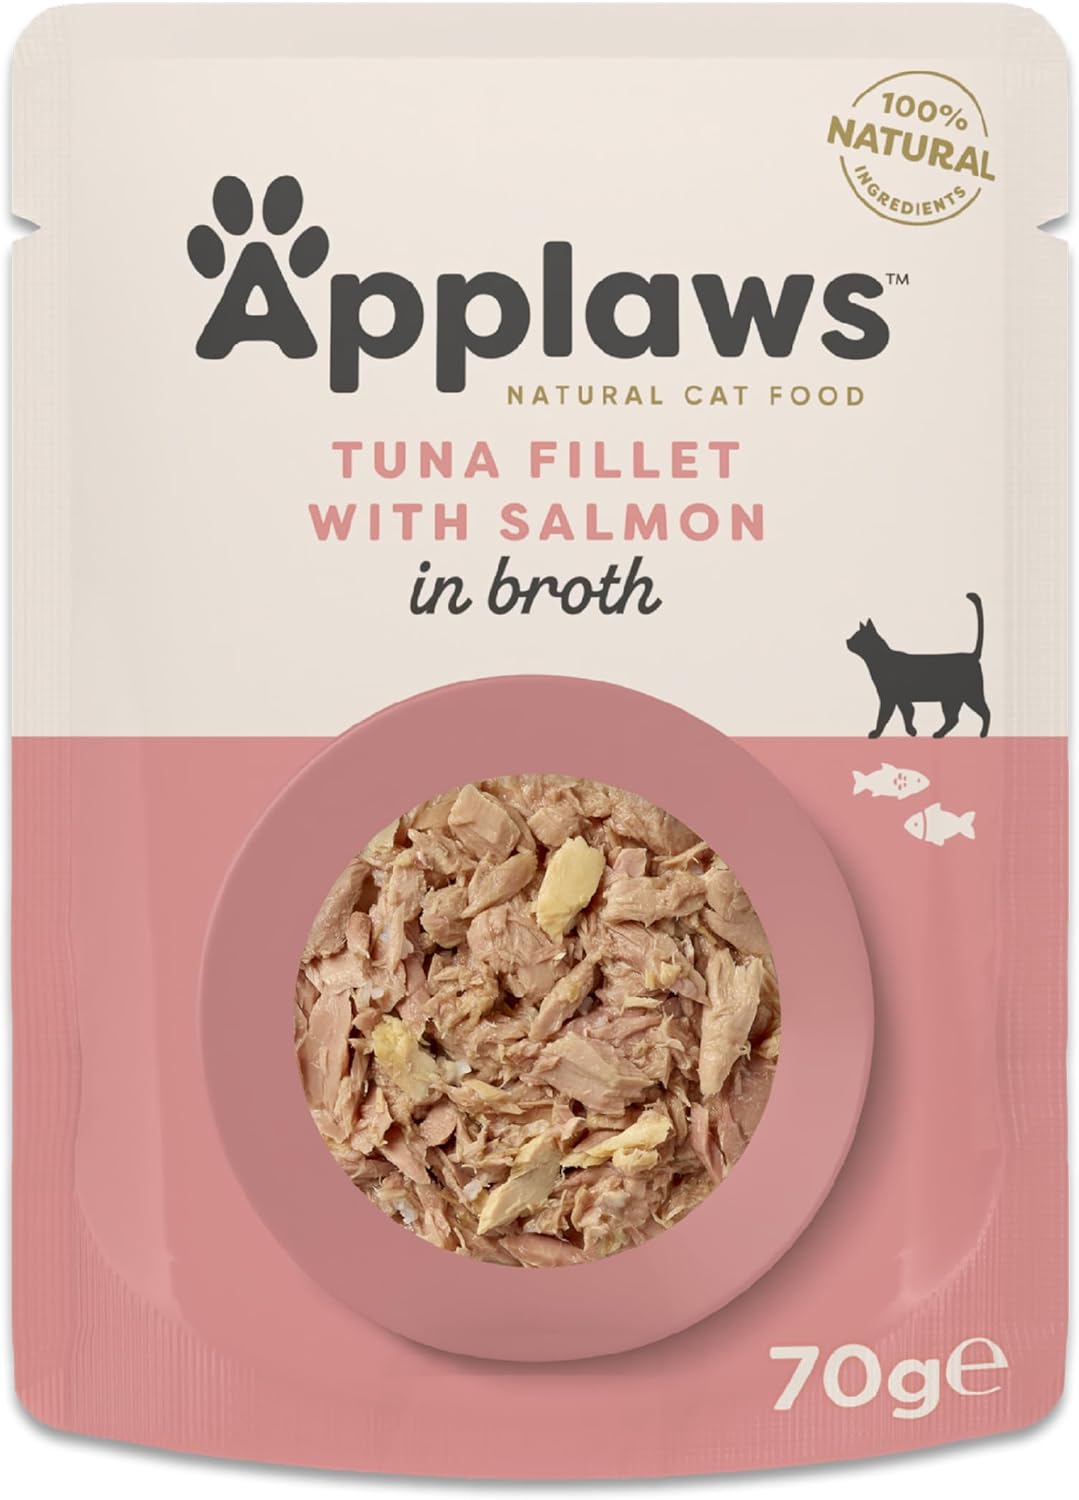 Applaws 100% Natural Adult Wet Cat Food, Tuna Fillet with Salmon in Broth 70g Pouch (12 x 70g Pouches)